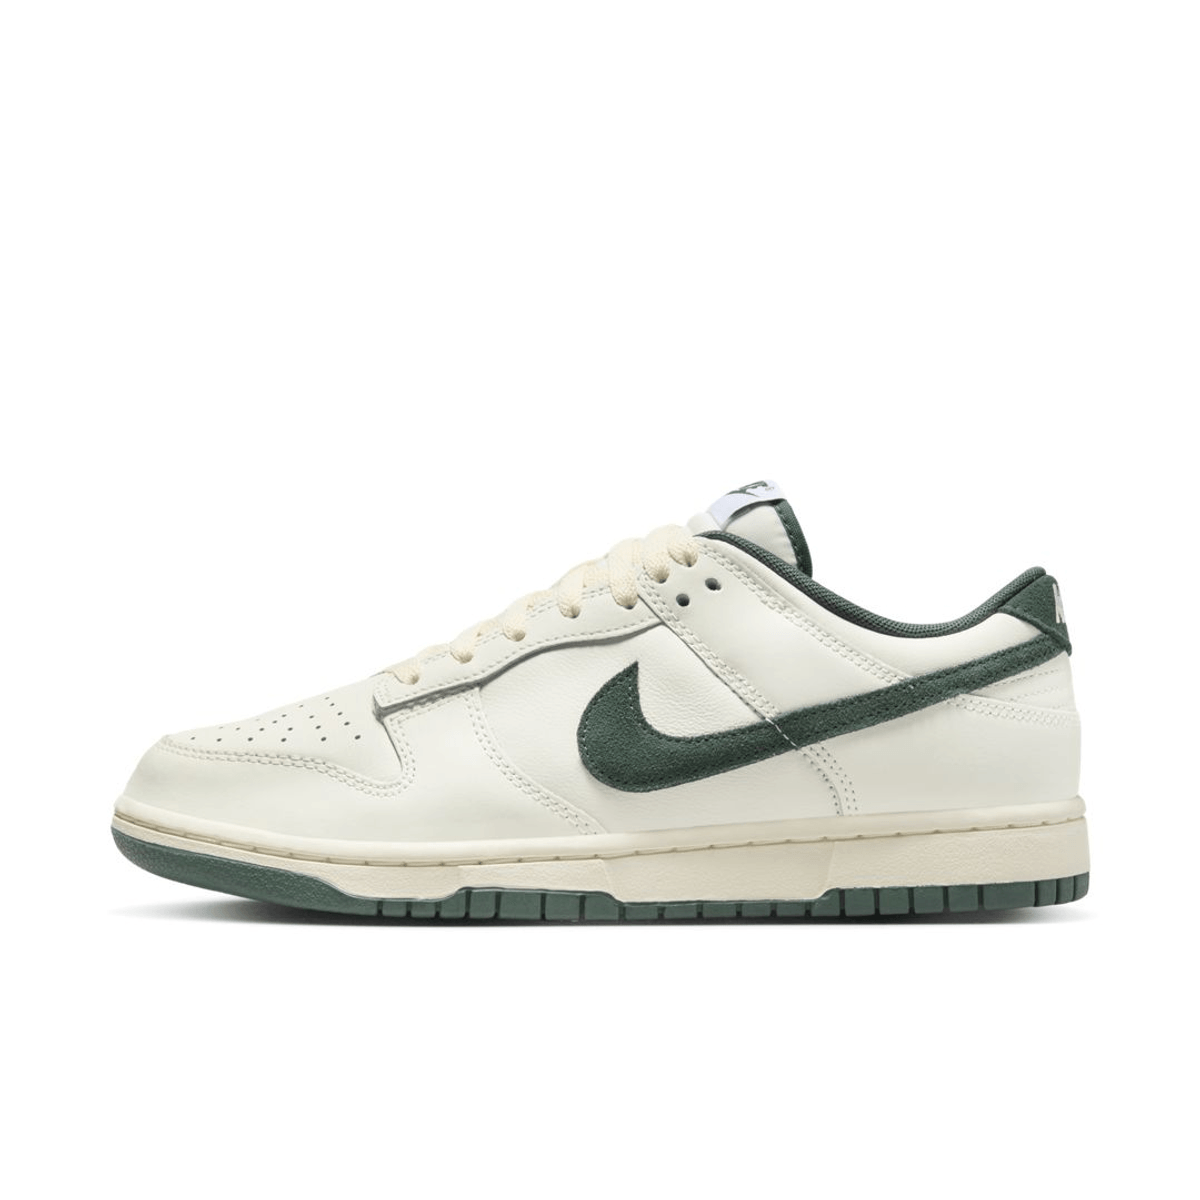 Official Images Of The Nike Dunk Low "Athletic Department"